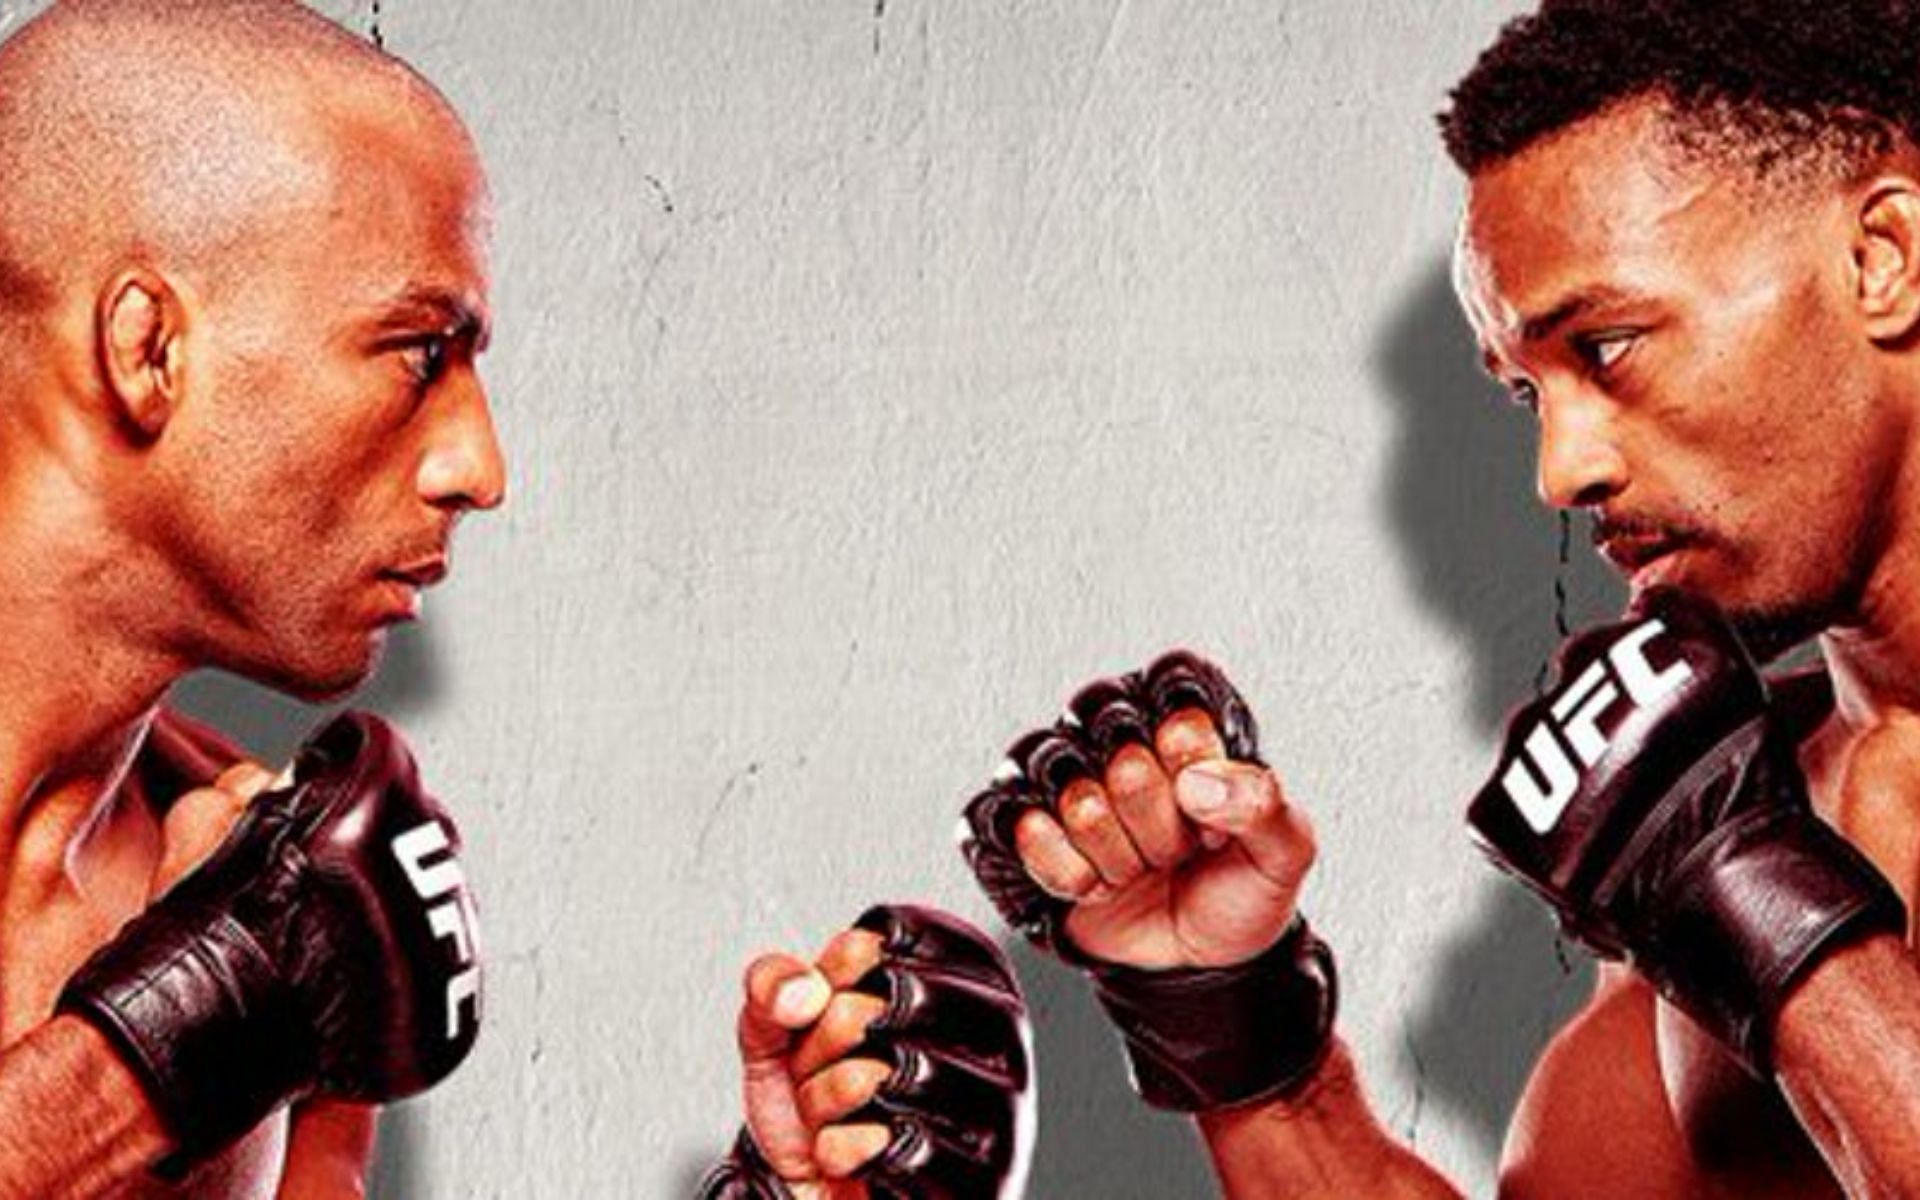 Edson barboza (left) and Lerone Murphy (right) will lock horns on May 18 [Image credits: @ufc on X]